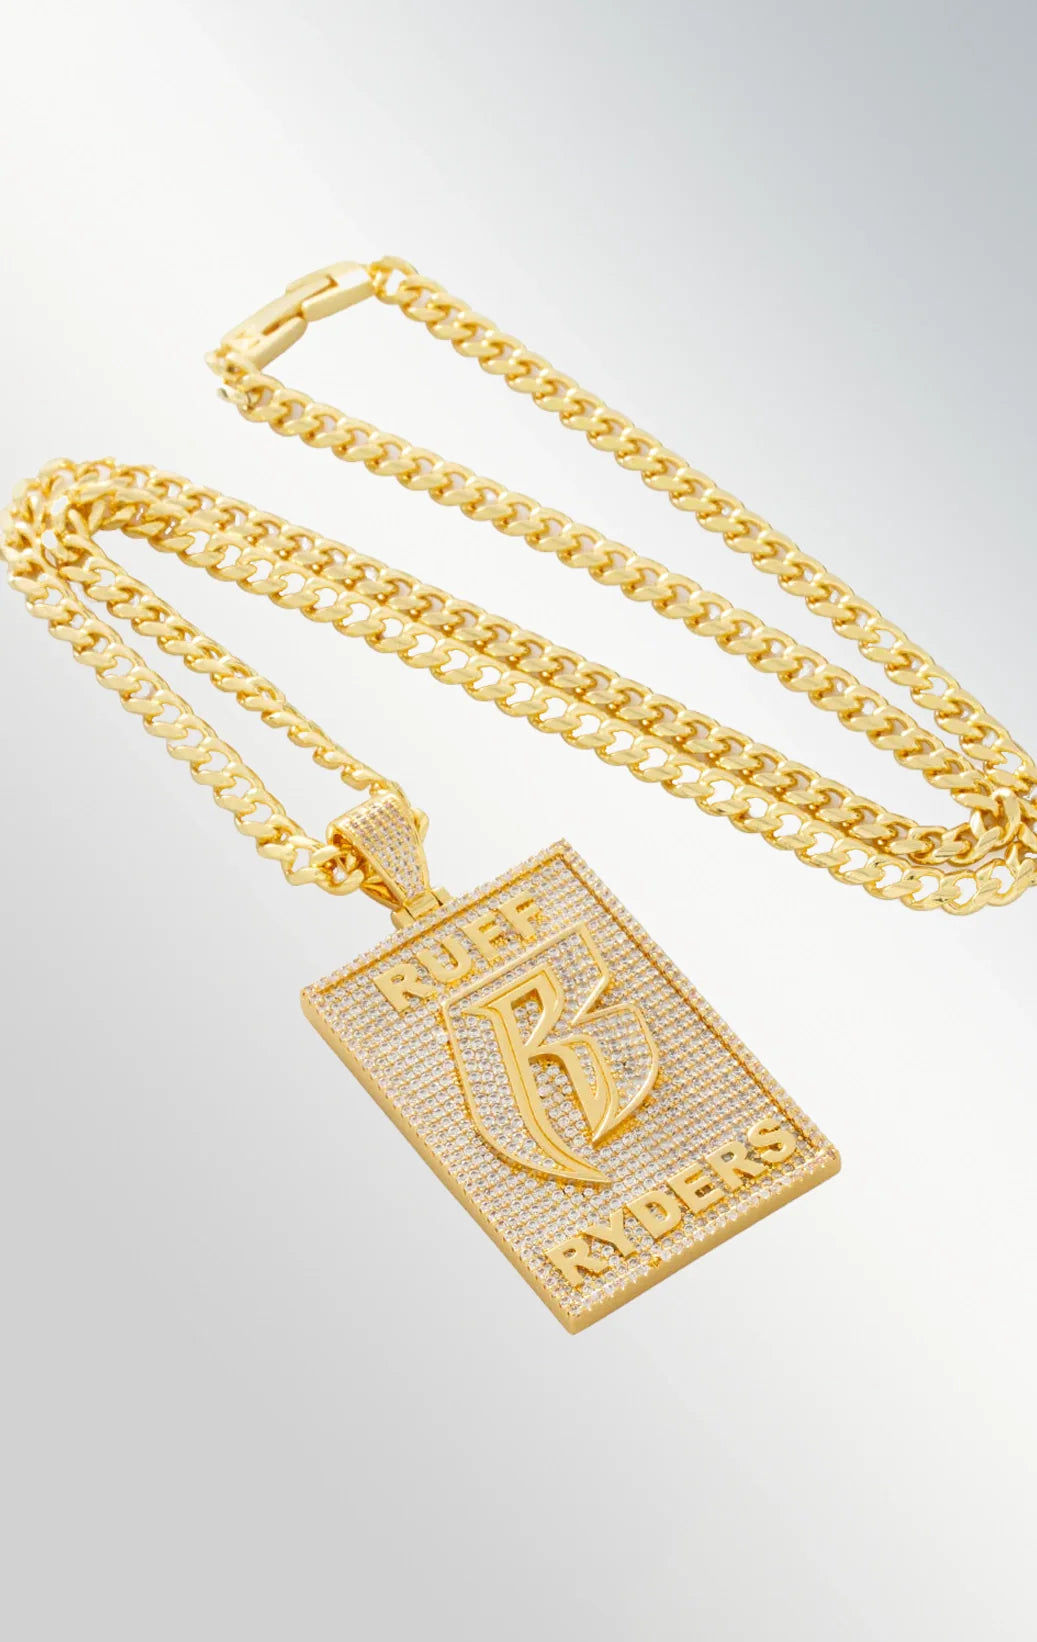 Dog tag ruff ryders pendant necklace in  gold